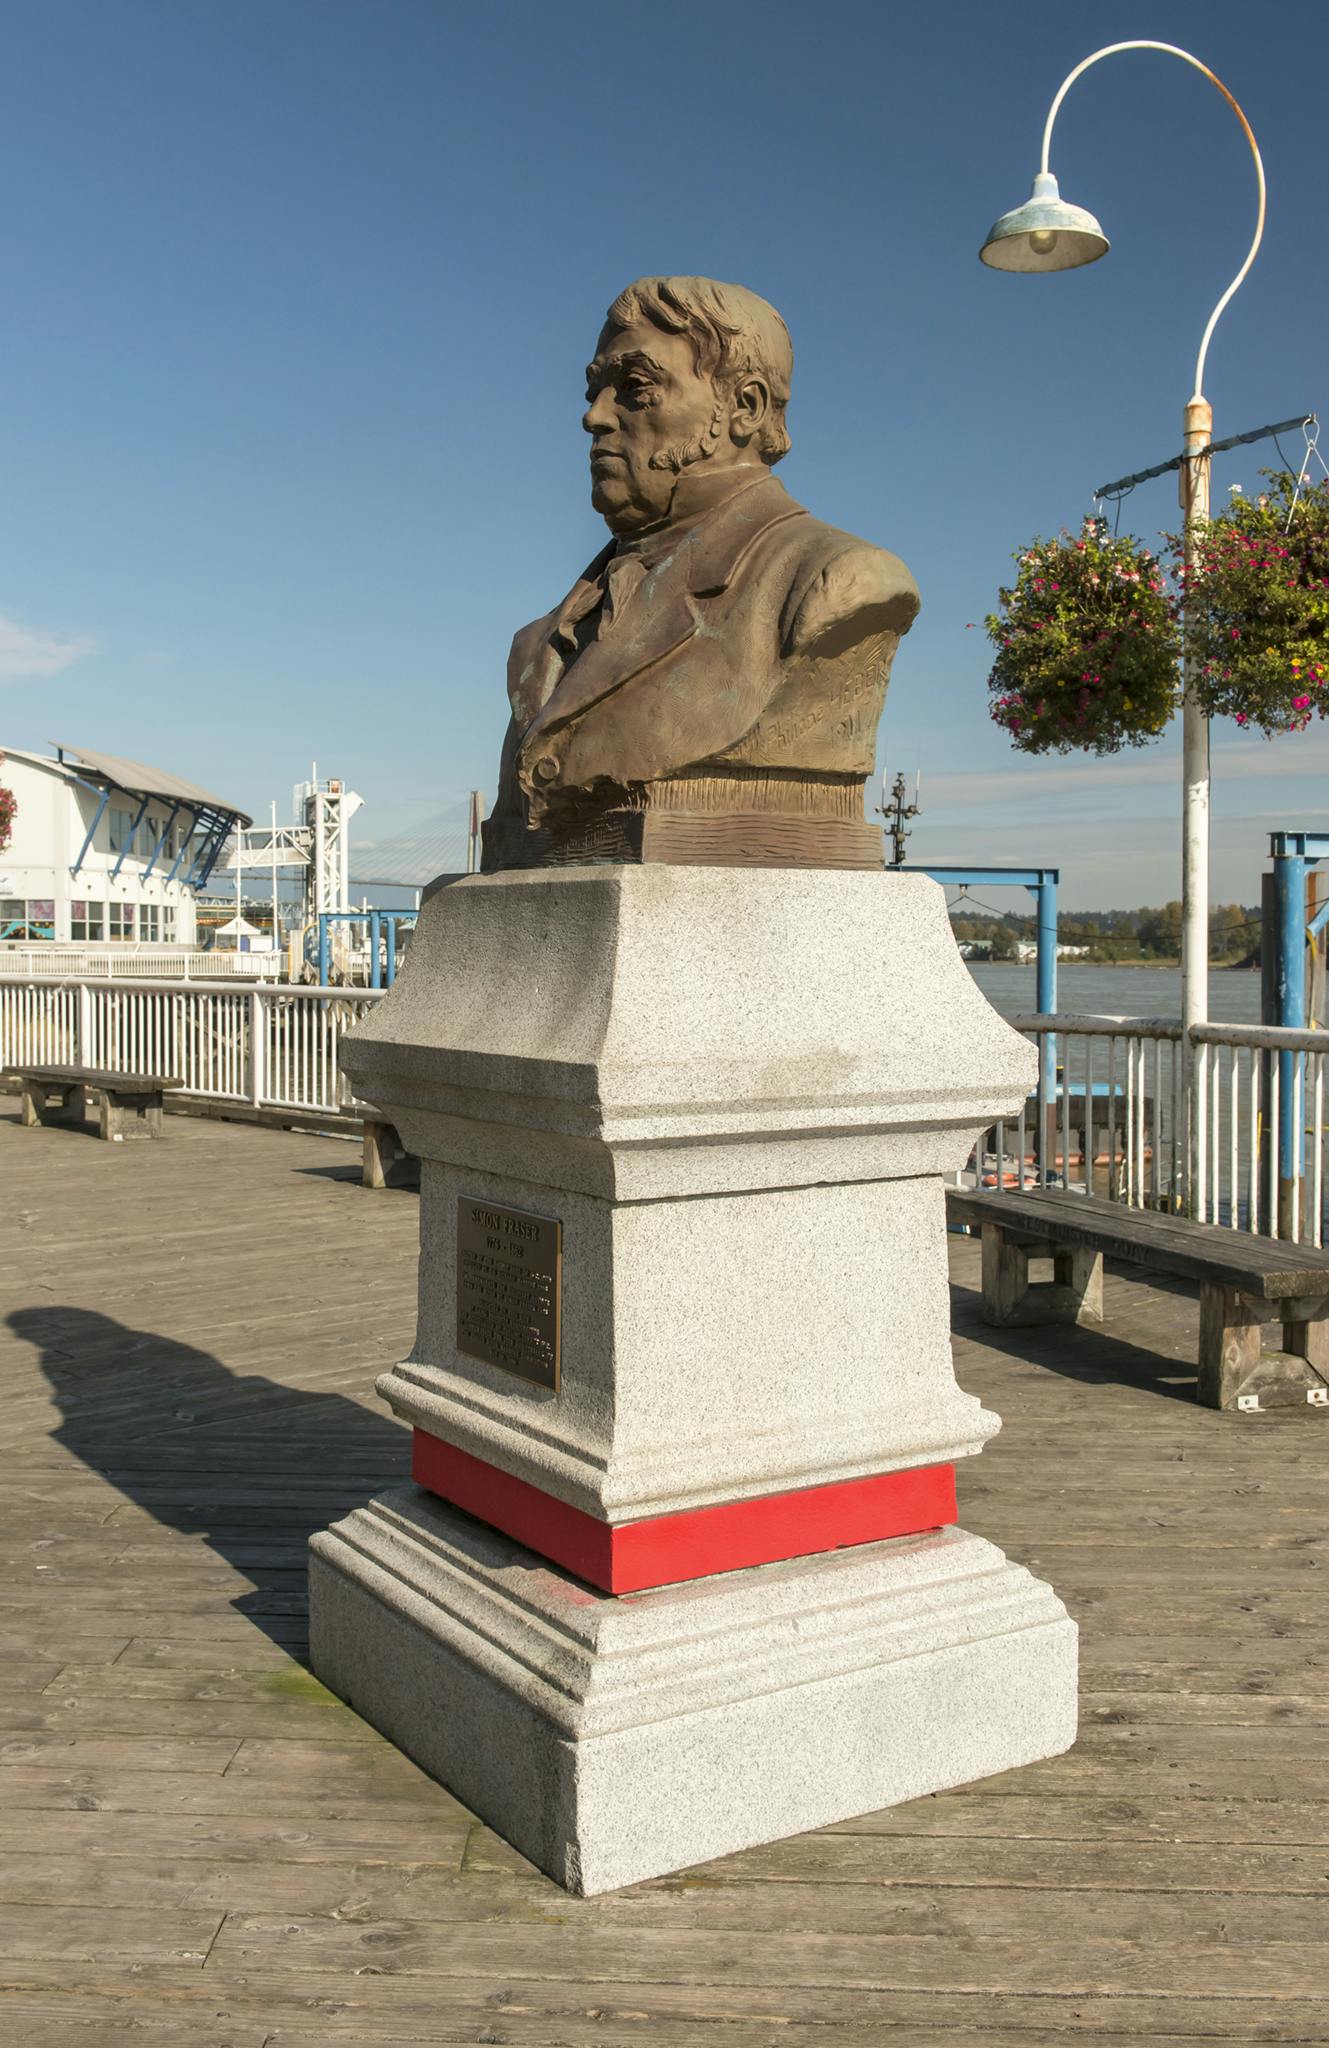 An image of a monument to Simon Fraser installed on a wooden pier by water. The monument is a bronze bust of Fraser atop a granite plinth. 